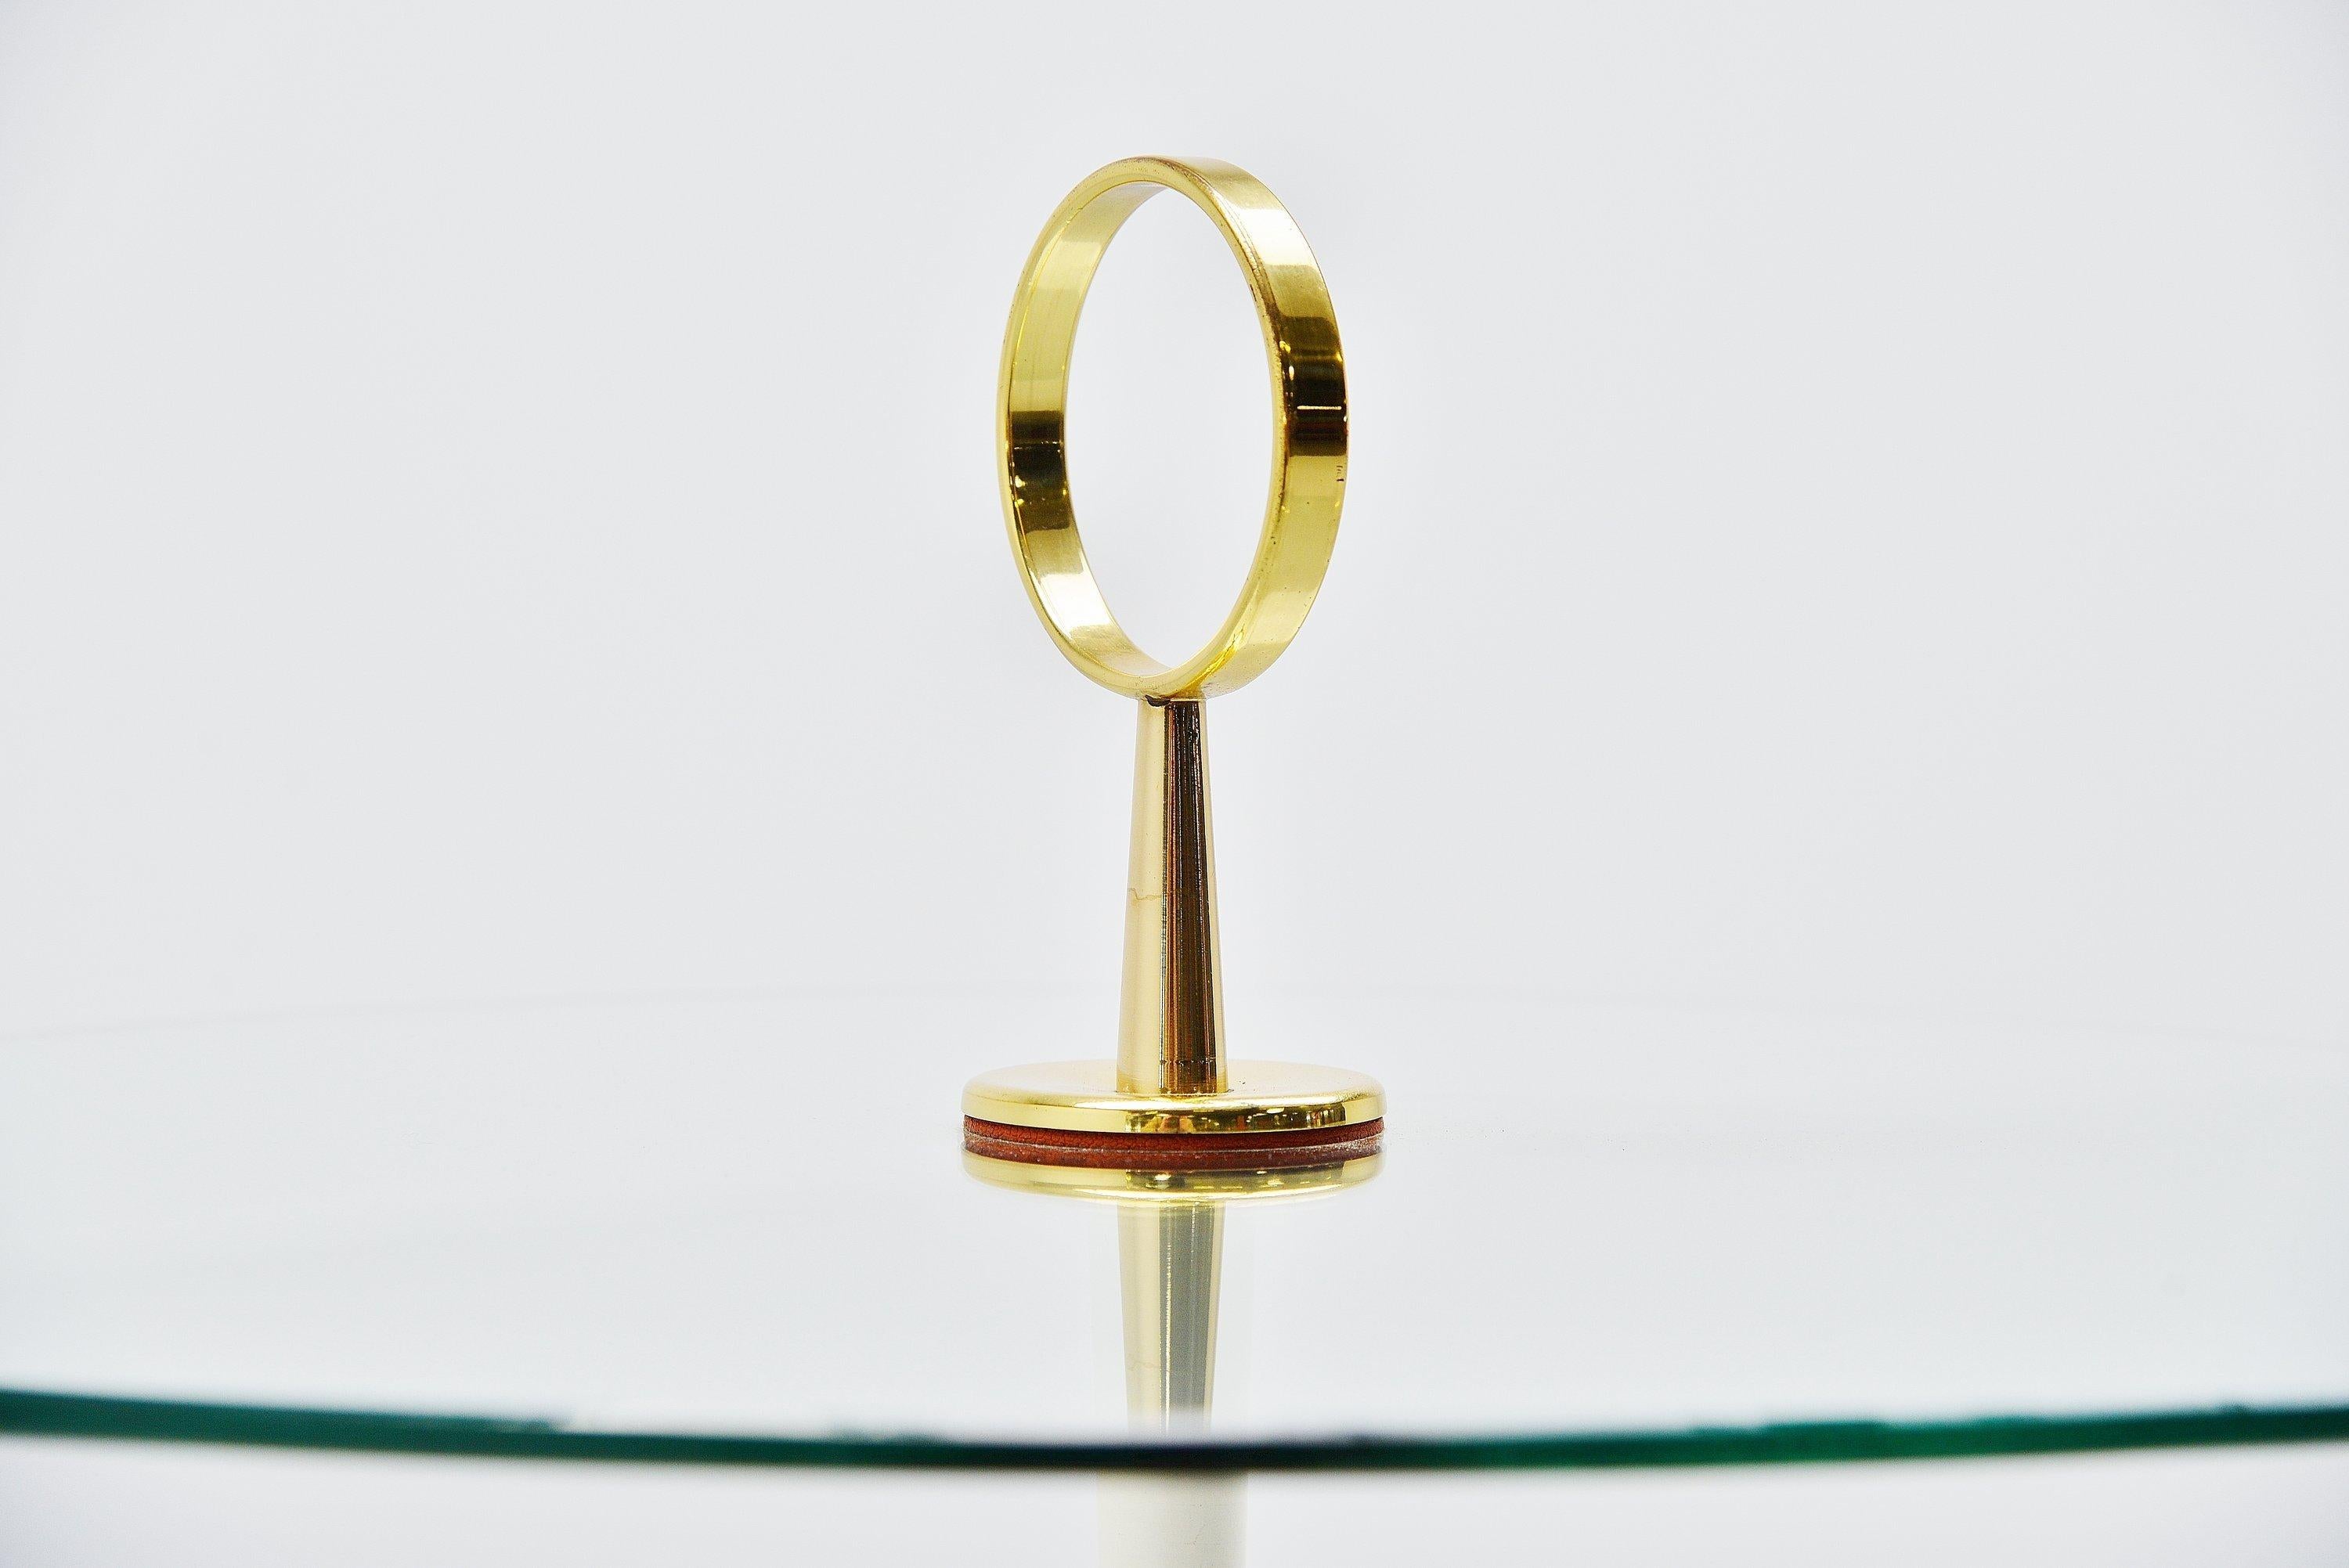 Italian Cesare lacca side table in brass and glass Italy 1950